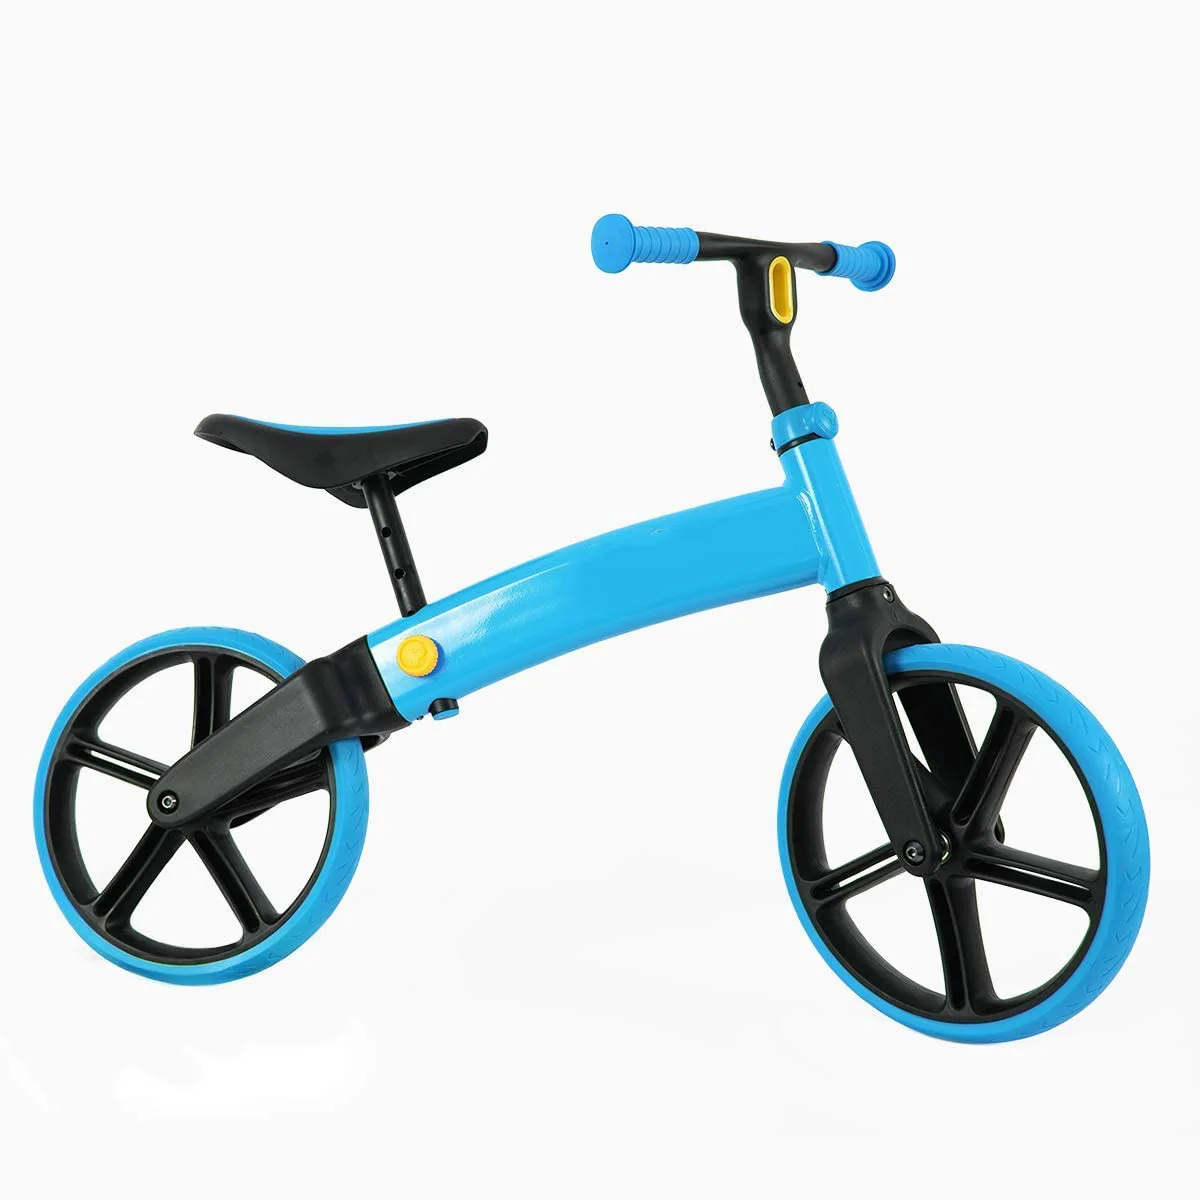 

Children No Pedal Bicycle Stability Cycle ride on toys Multicolor Optional Powered Toddler Bike Kids Balance Bike, Customized